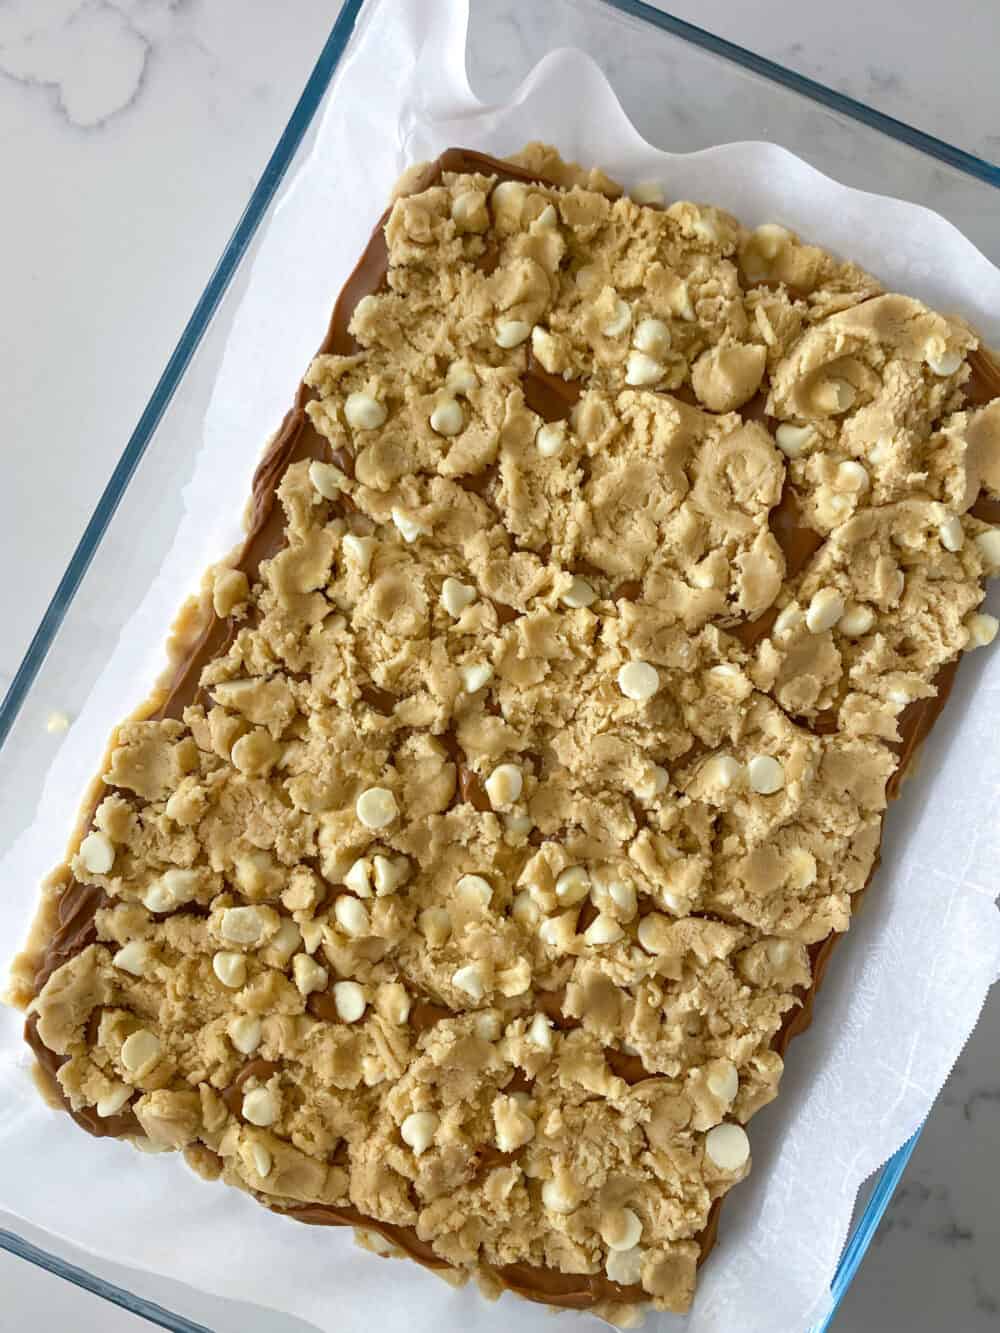 press cookie dough evenly over top in baking dish